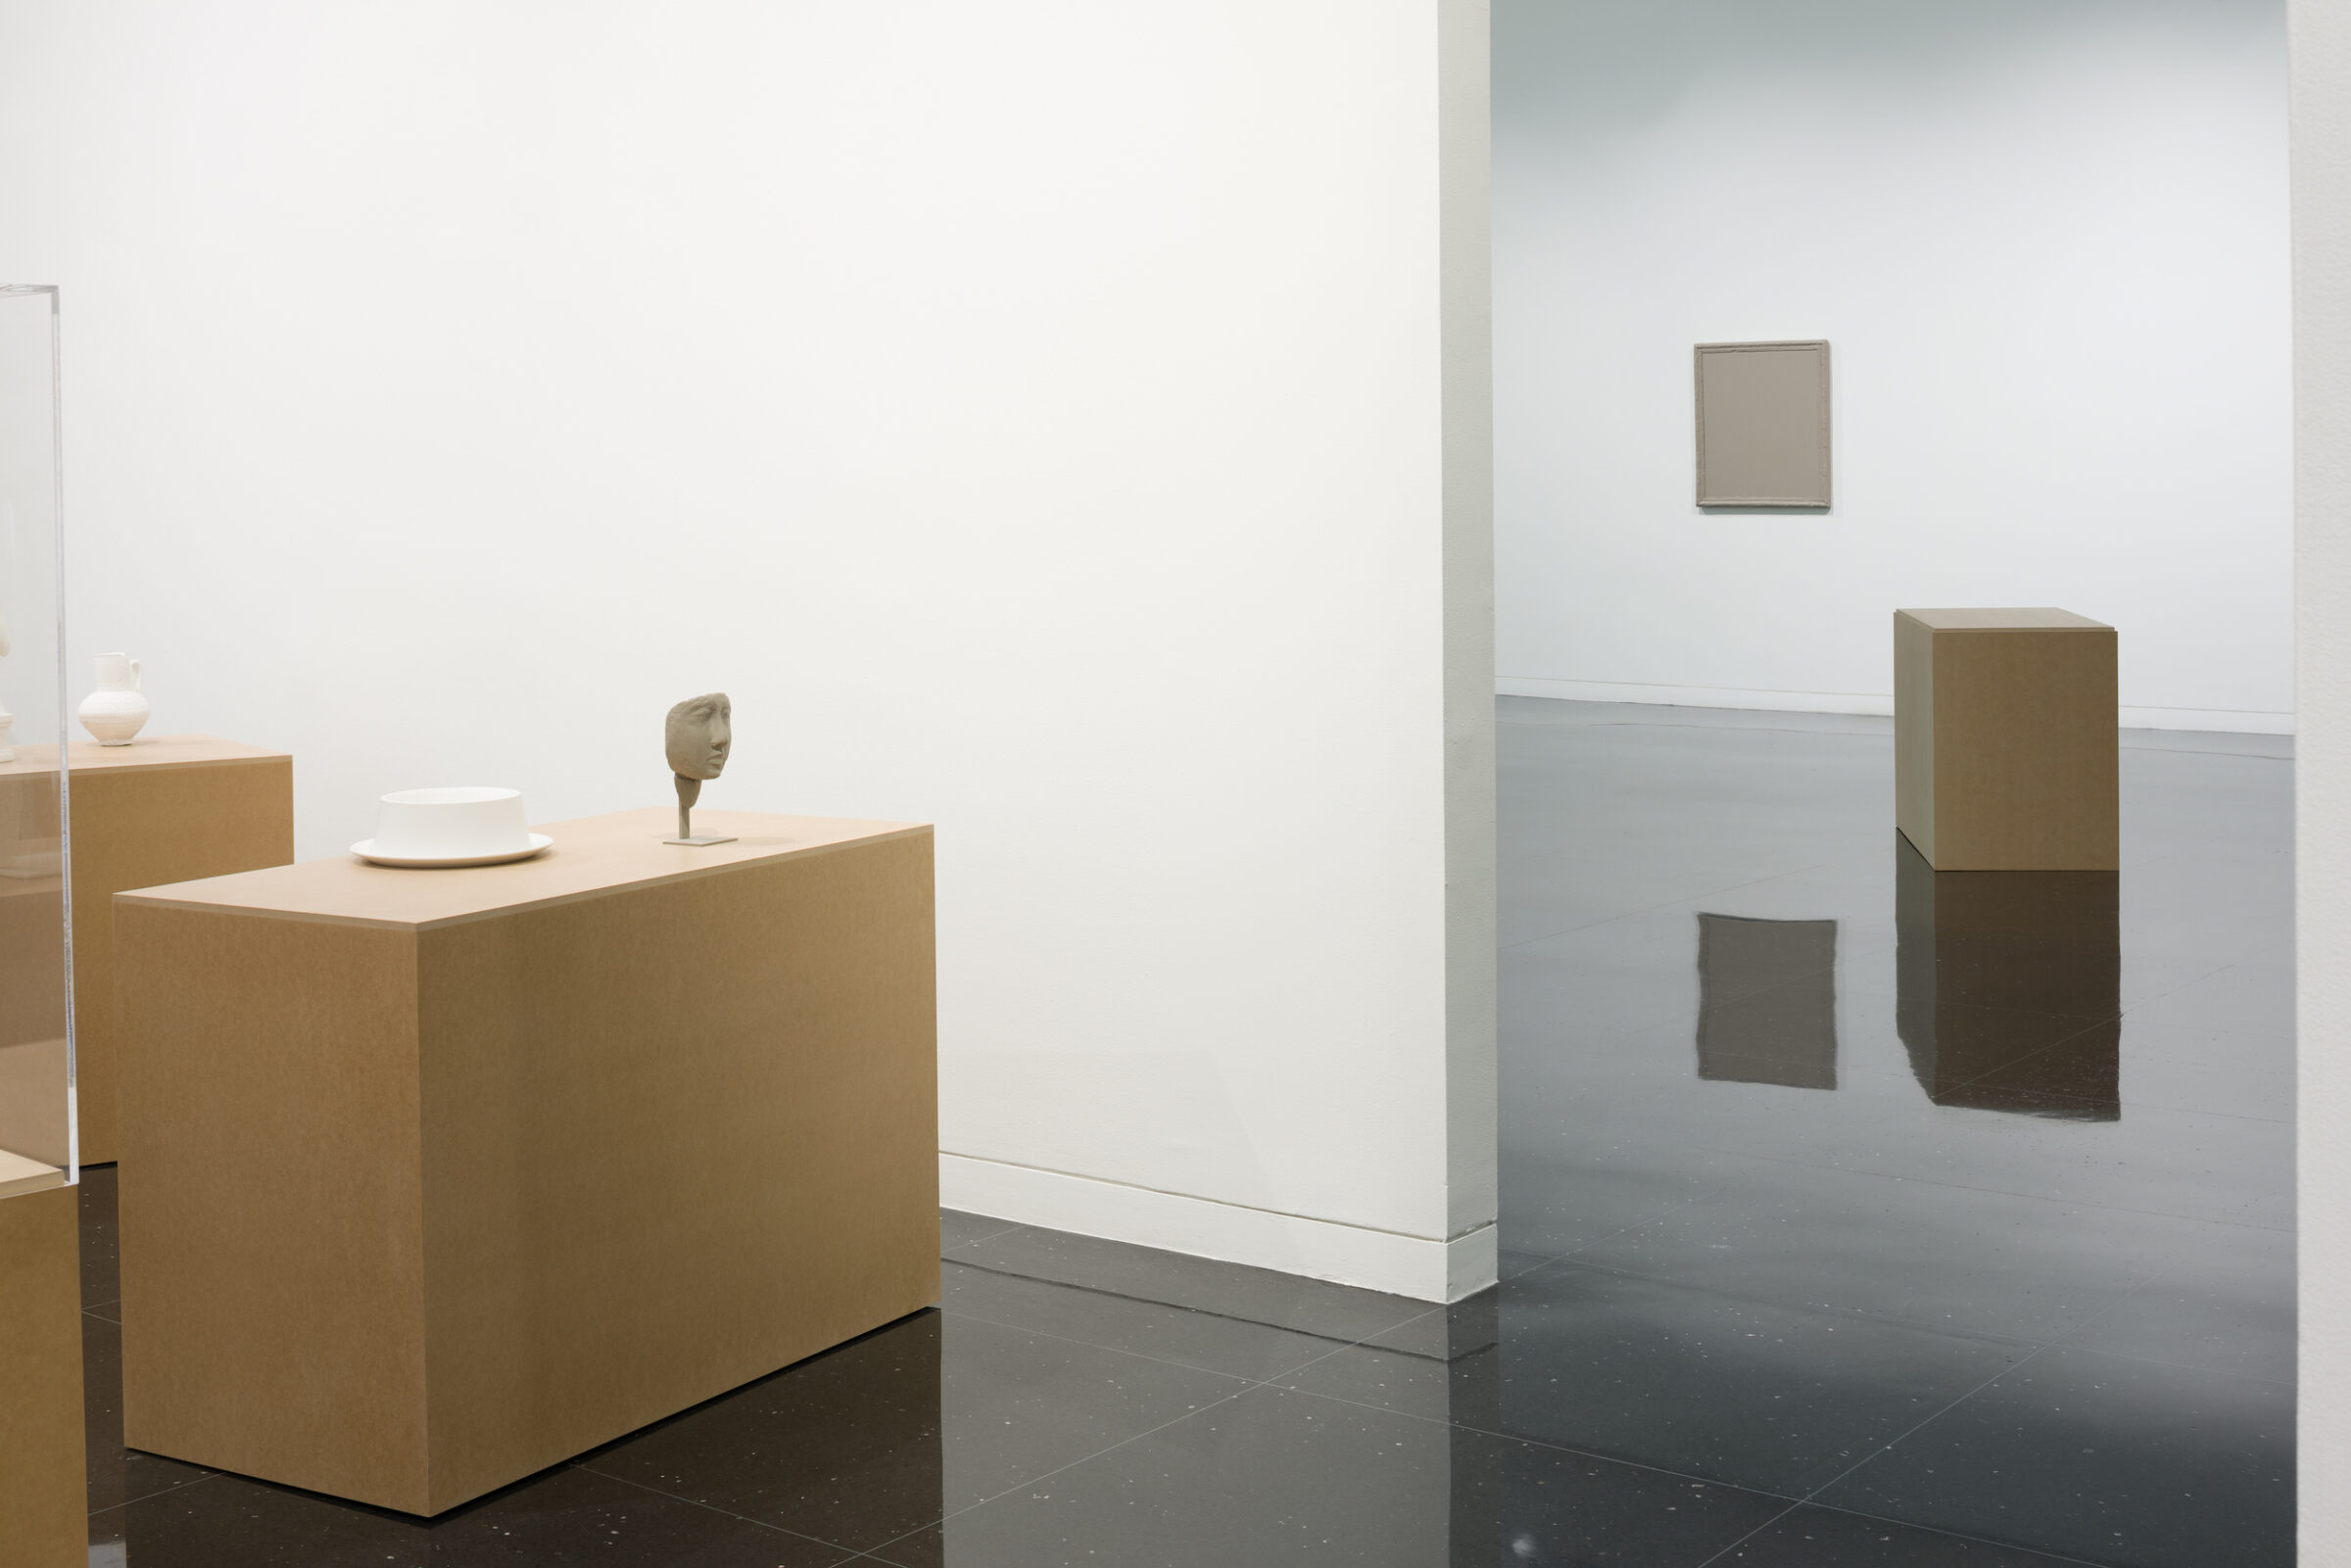 A pedestal resembling a cardboard box sits next to a white, freestanding gallery wall. Atop the box is an unfired clay mask, to the left of which sits a fired but unglazed ceramic hat. To the right and on the other side of the freestanding wall, another pedestal is visible next to a gray square installed on the gallery wall.